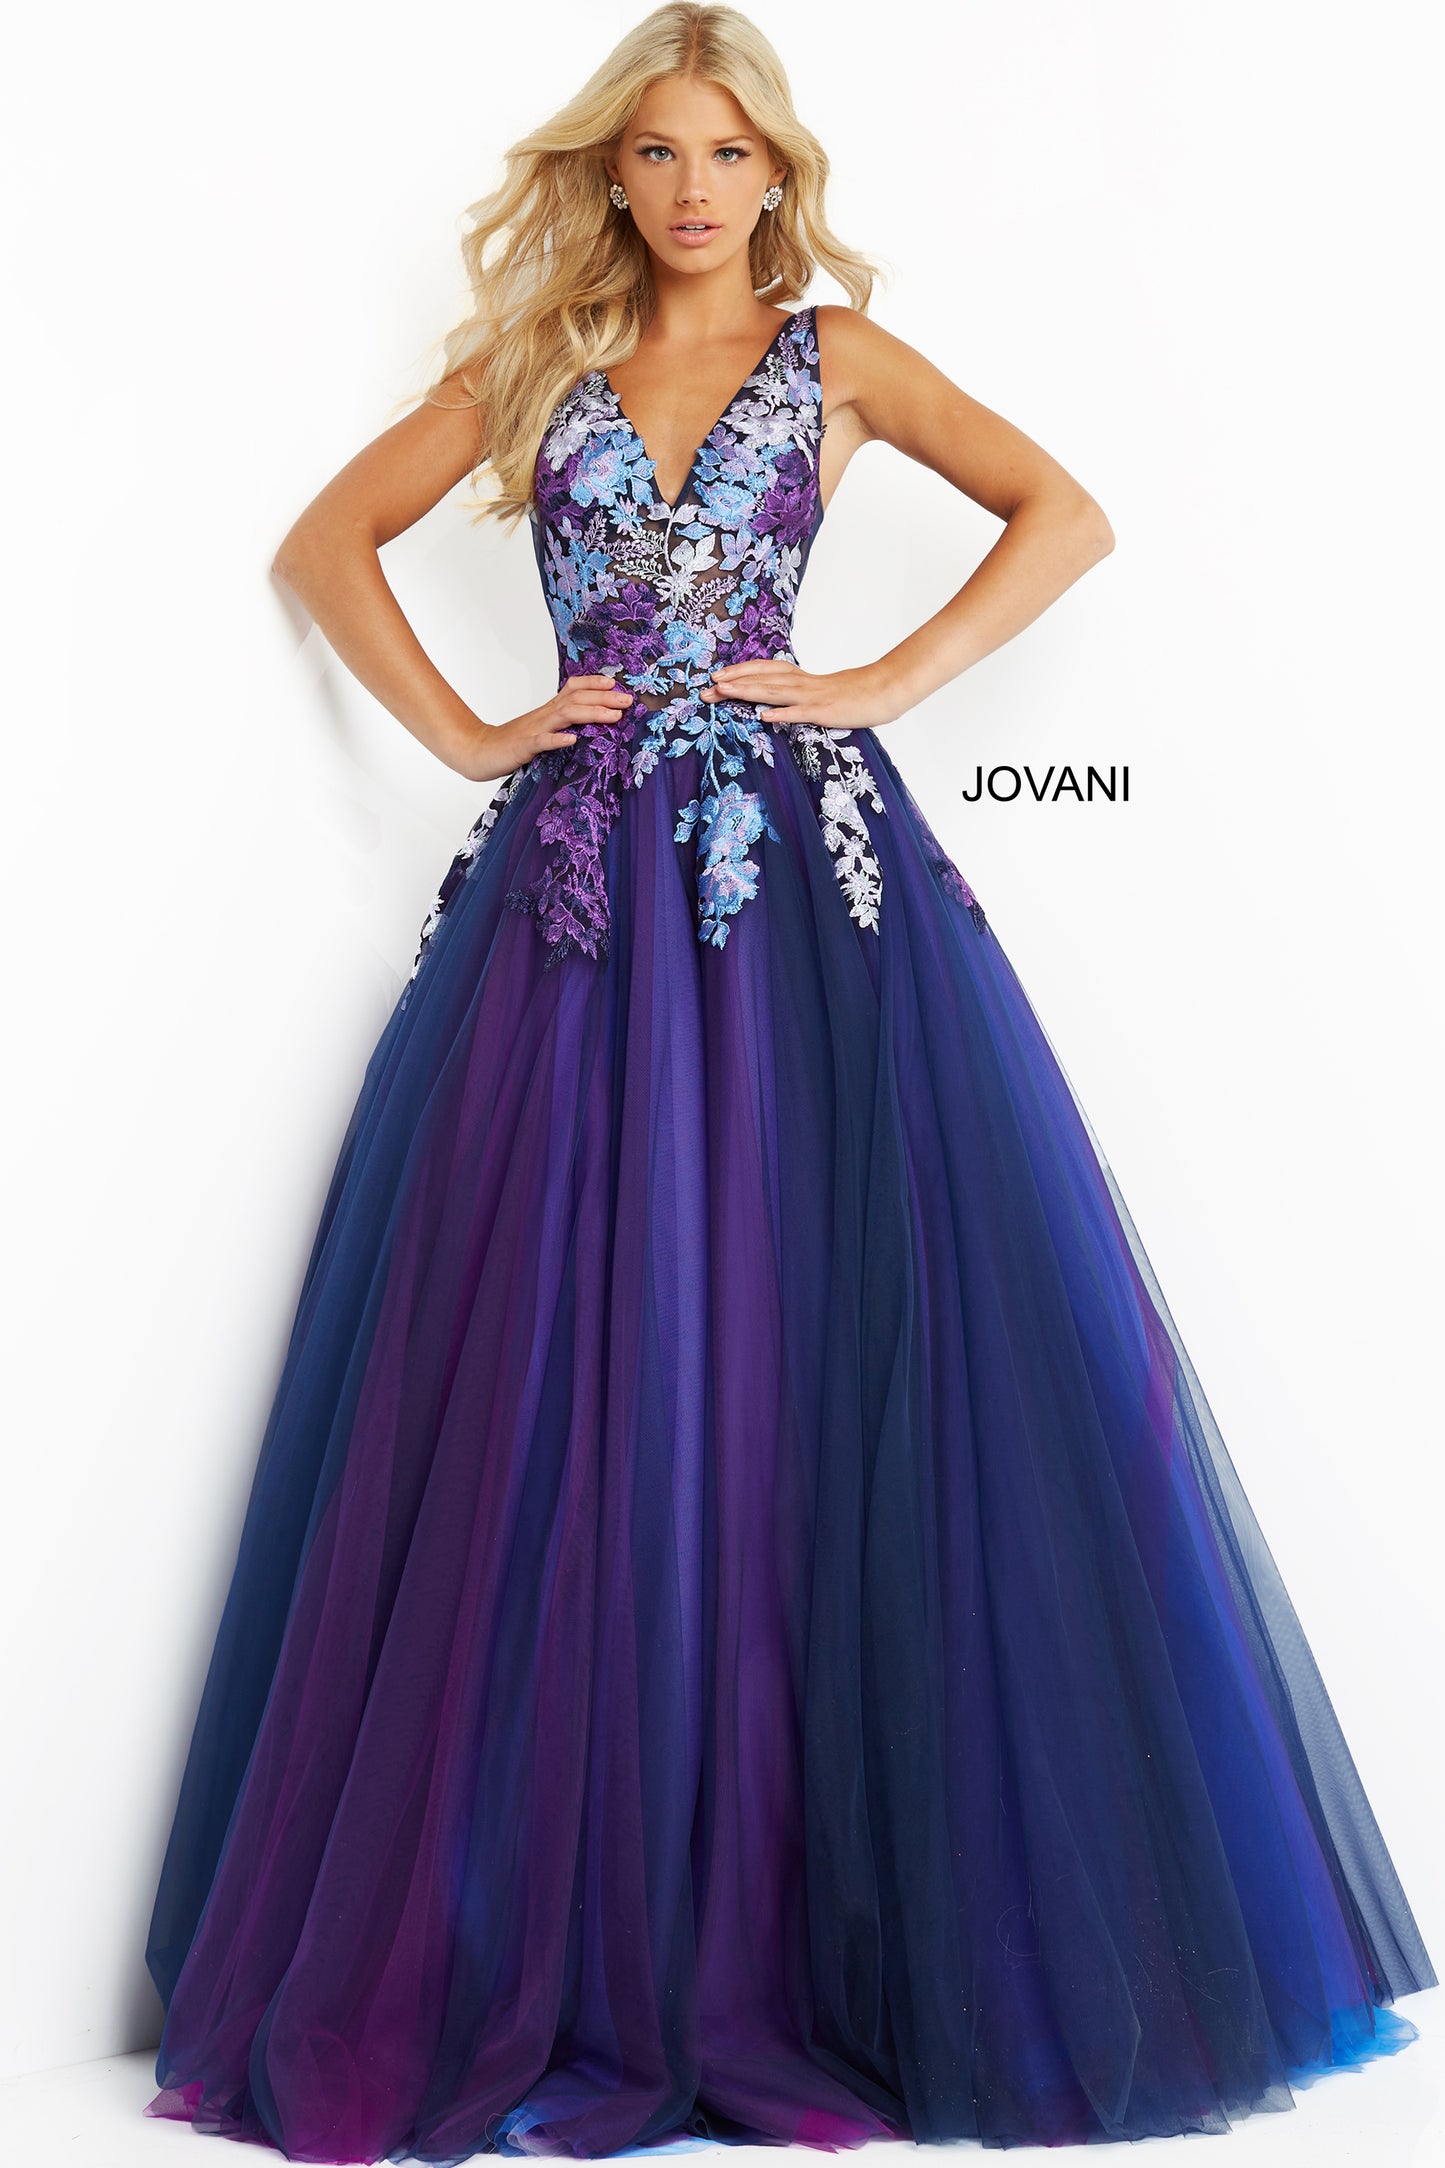 Jovani 06807 Navy Multi Long Ballgown Prom Dress. Floor length navy multi Jovani prom ballgown 06807 features floral embroidered sleeveless bodice with plunging V neck and open back.